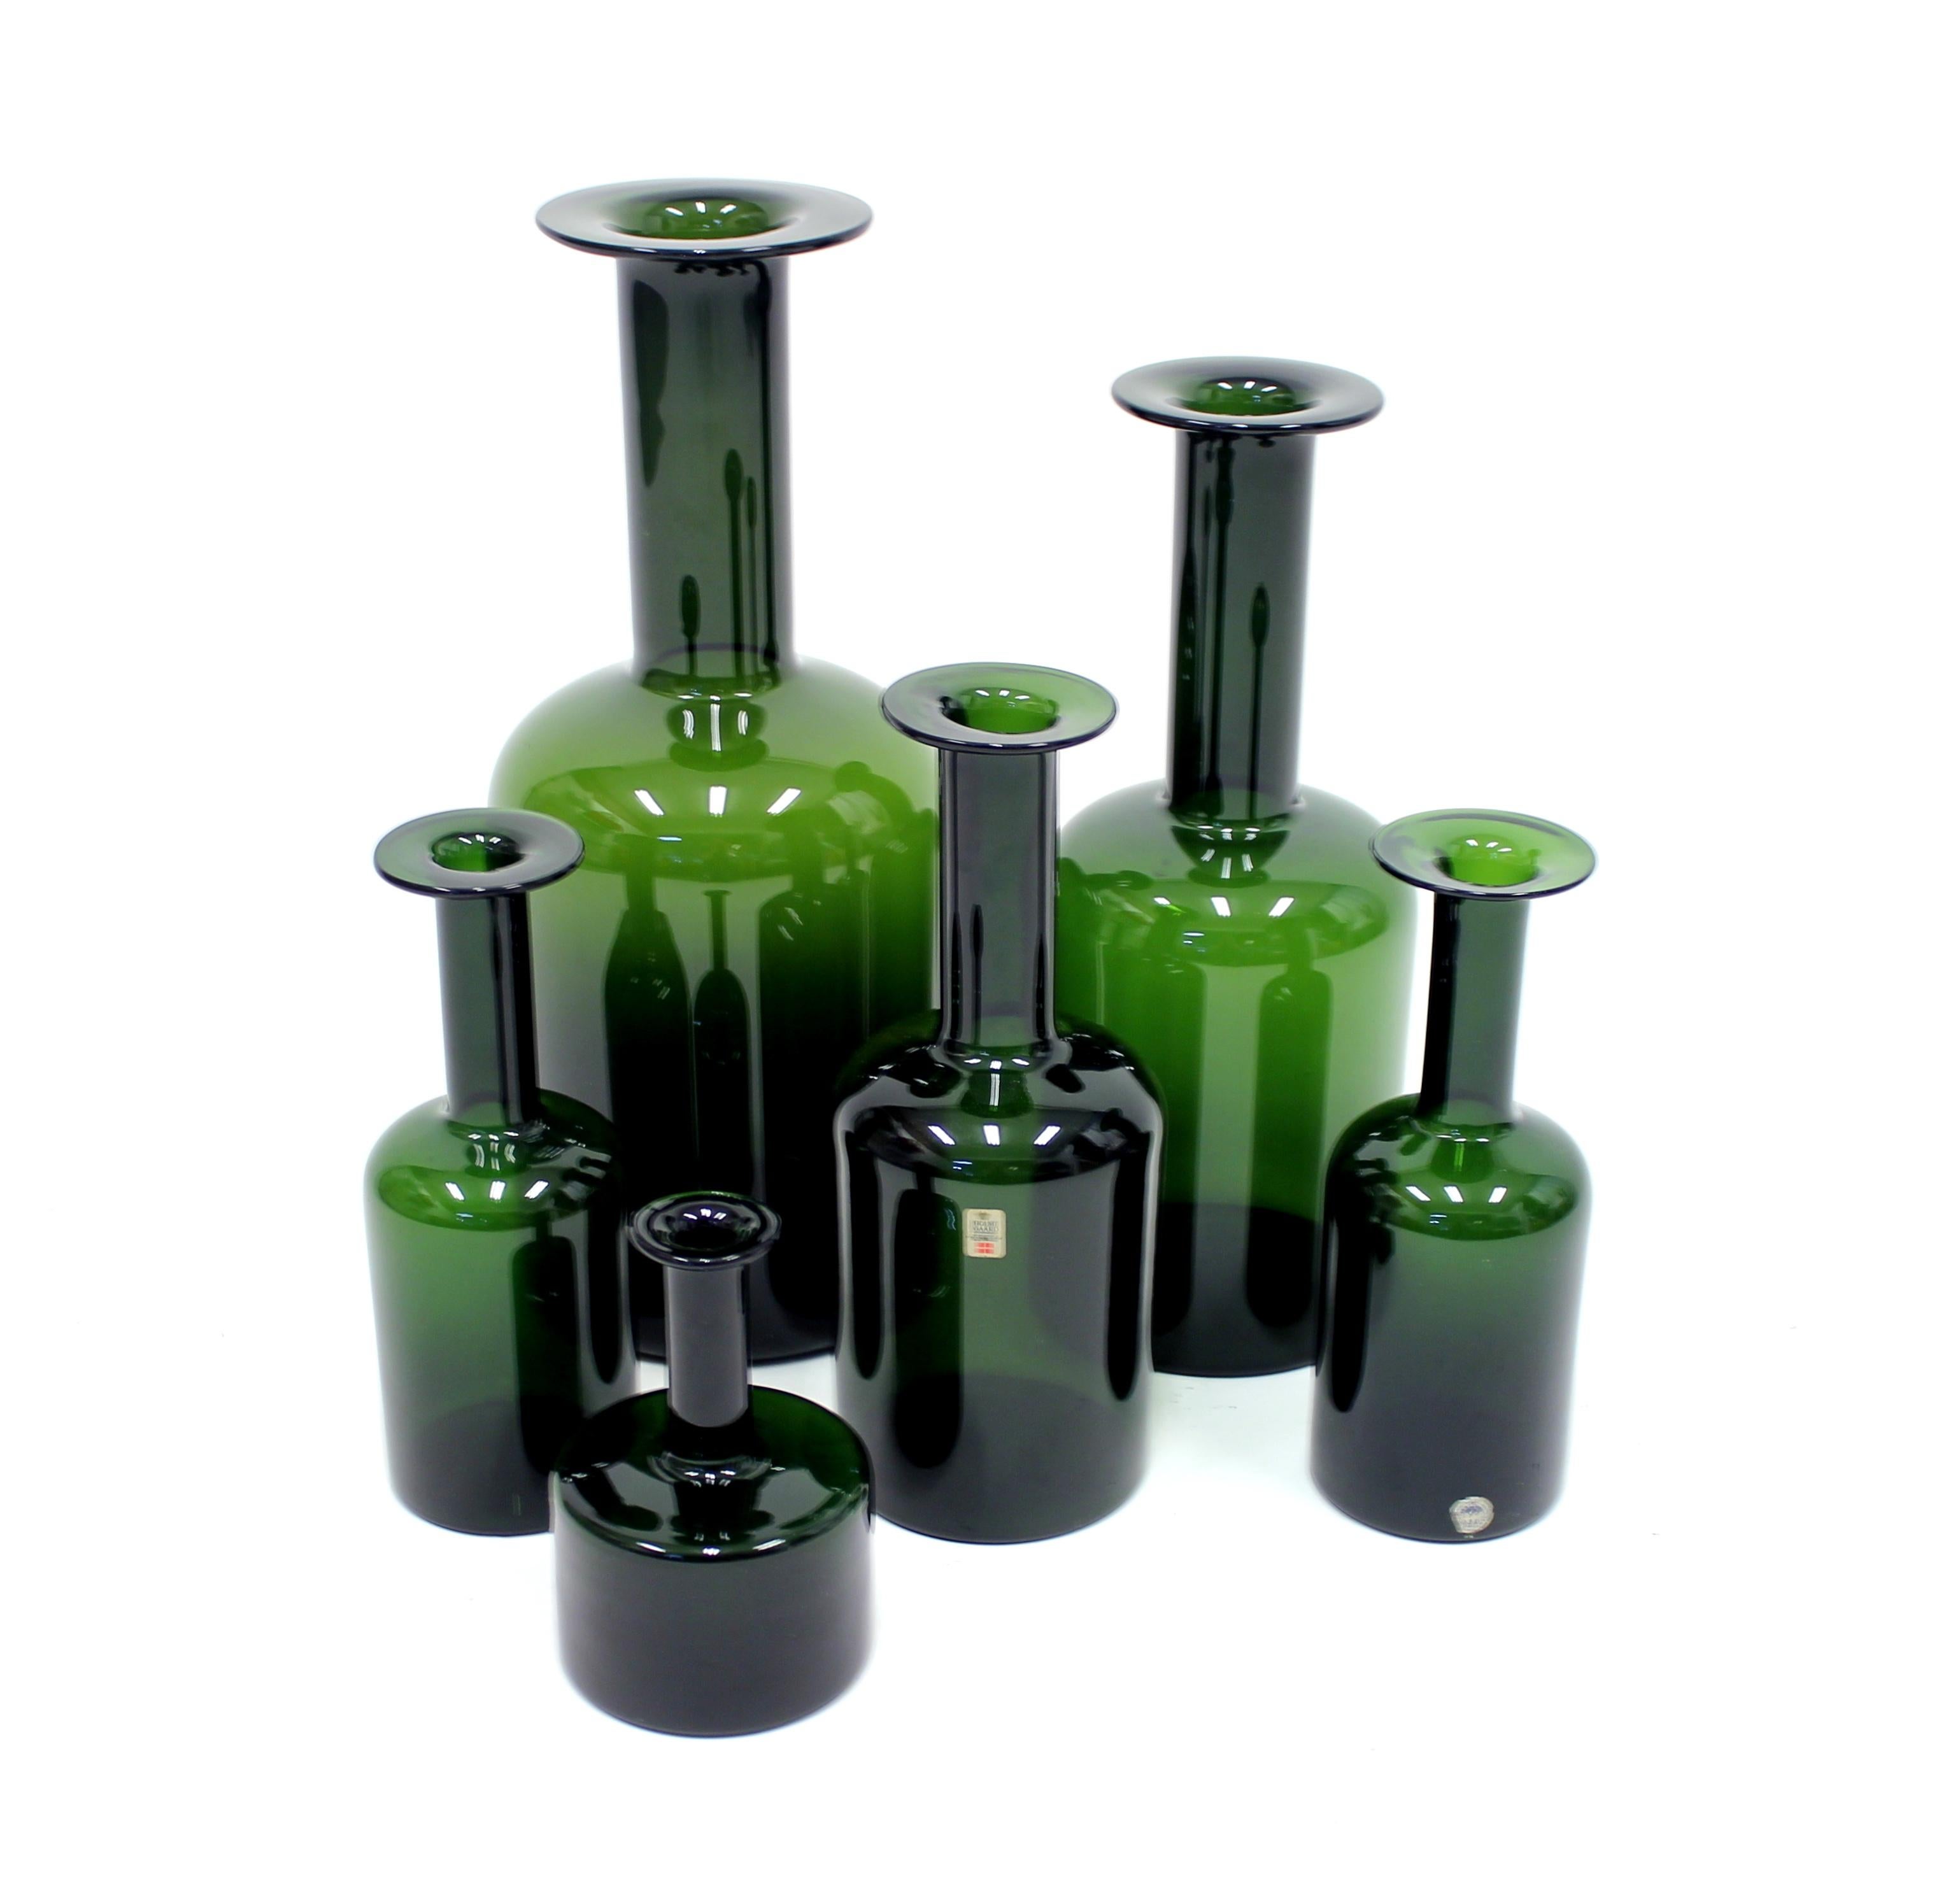 Set of 6 Holmegaard vases designed by Otto Brauer in a bottle green color. The set contains five different sizes with the height measuring between 17-44 cm. Two of the vases have the original Holmegaard sticker. Good vintage condition.